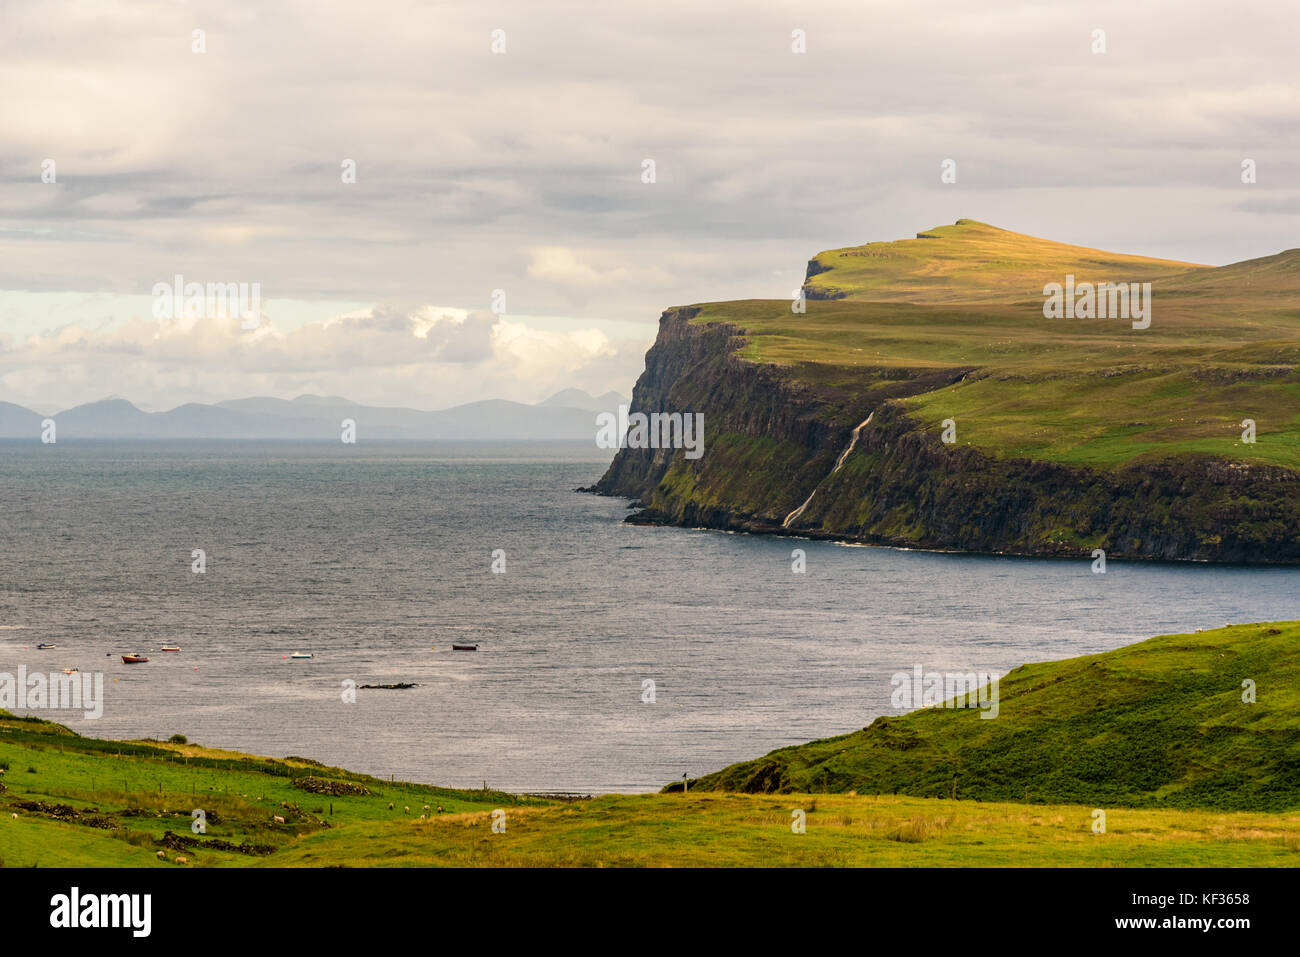 Scenic view of the wonderful nature near Portree, a small town in the Isle of Skye, Scotland Stock Photo